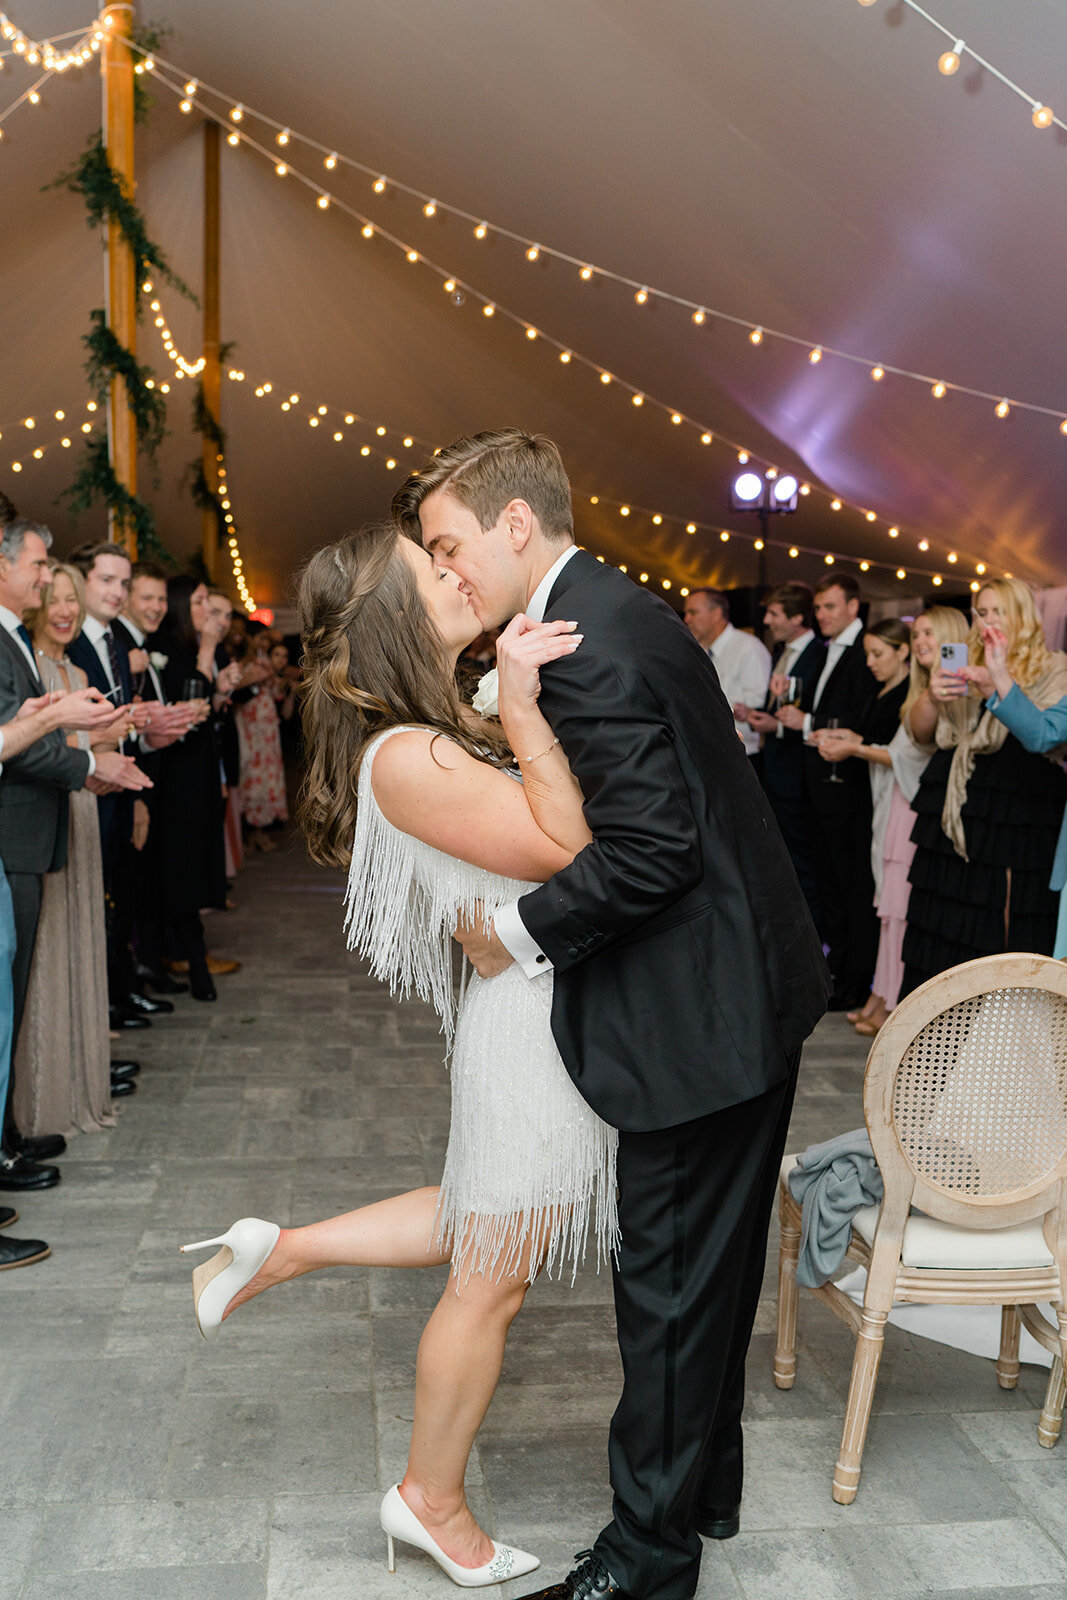 bride_and_groom_weddding_reception_exit_string_lights_kiss_bradley_estate_flash_photography_kailee_dimeglio_photography-2260_websize